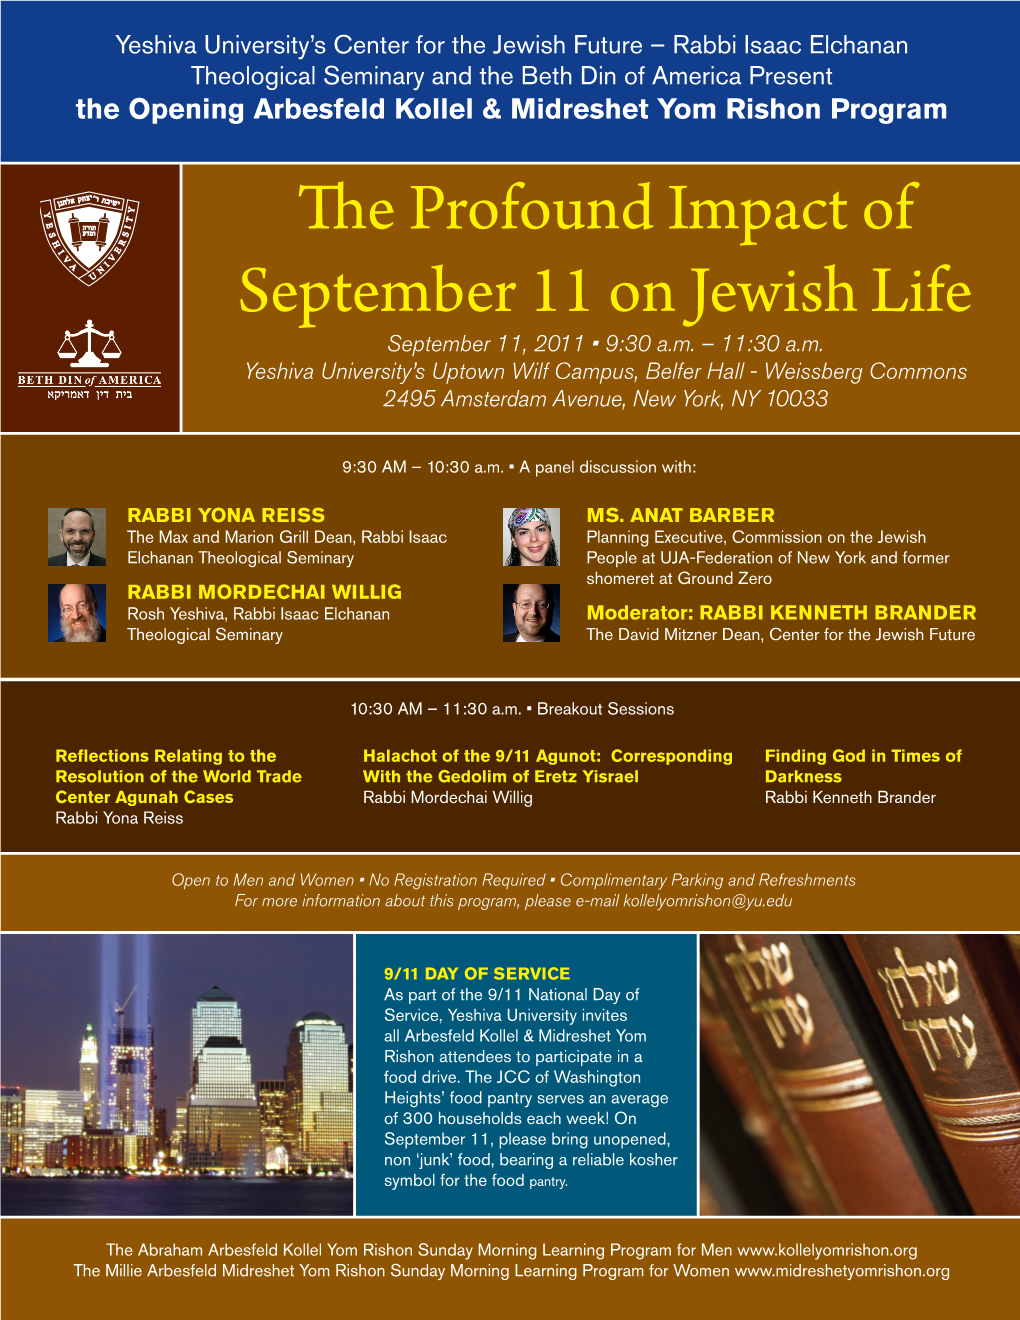 The Profound Impact of September 11 on Jewish Life September 11, 2011 • 9:30 A.M